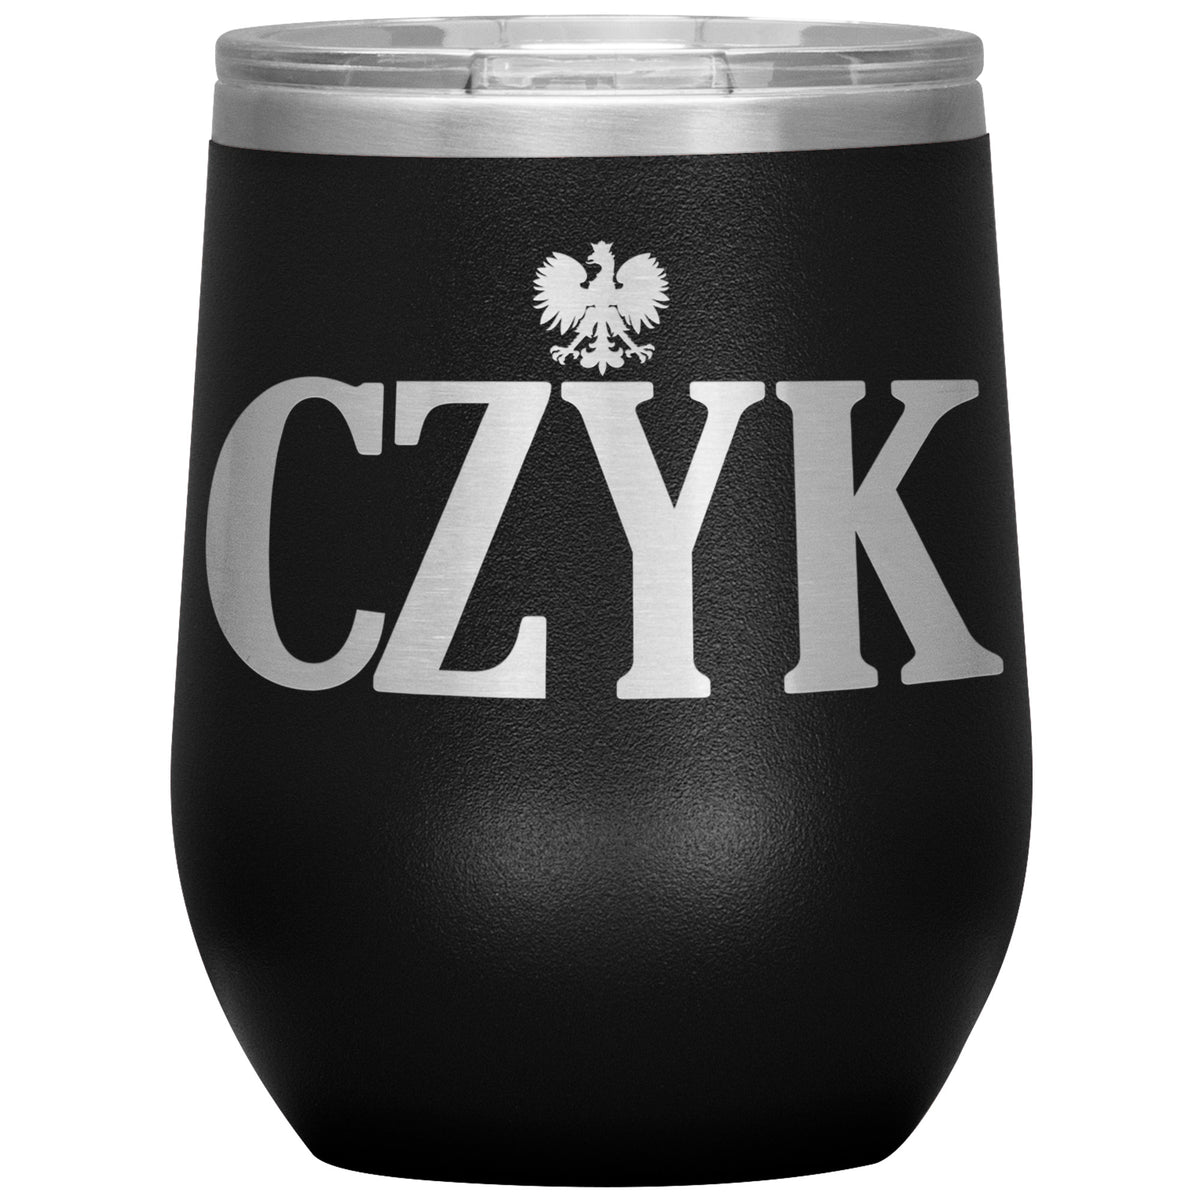 Polish Surnames Ending In CZYK Insulated Wine Tumbler Tumblers teelaunch Black  